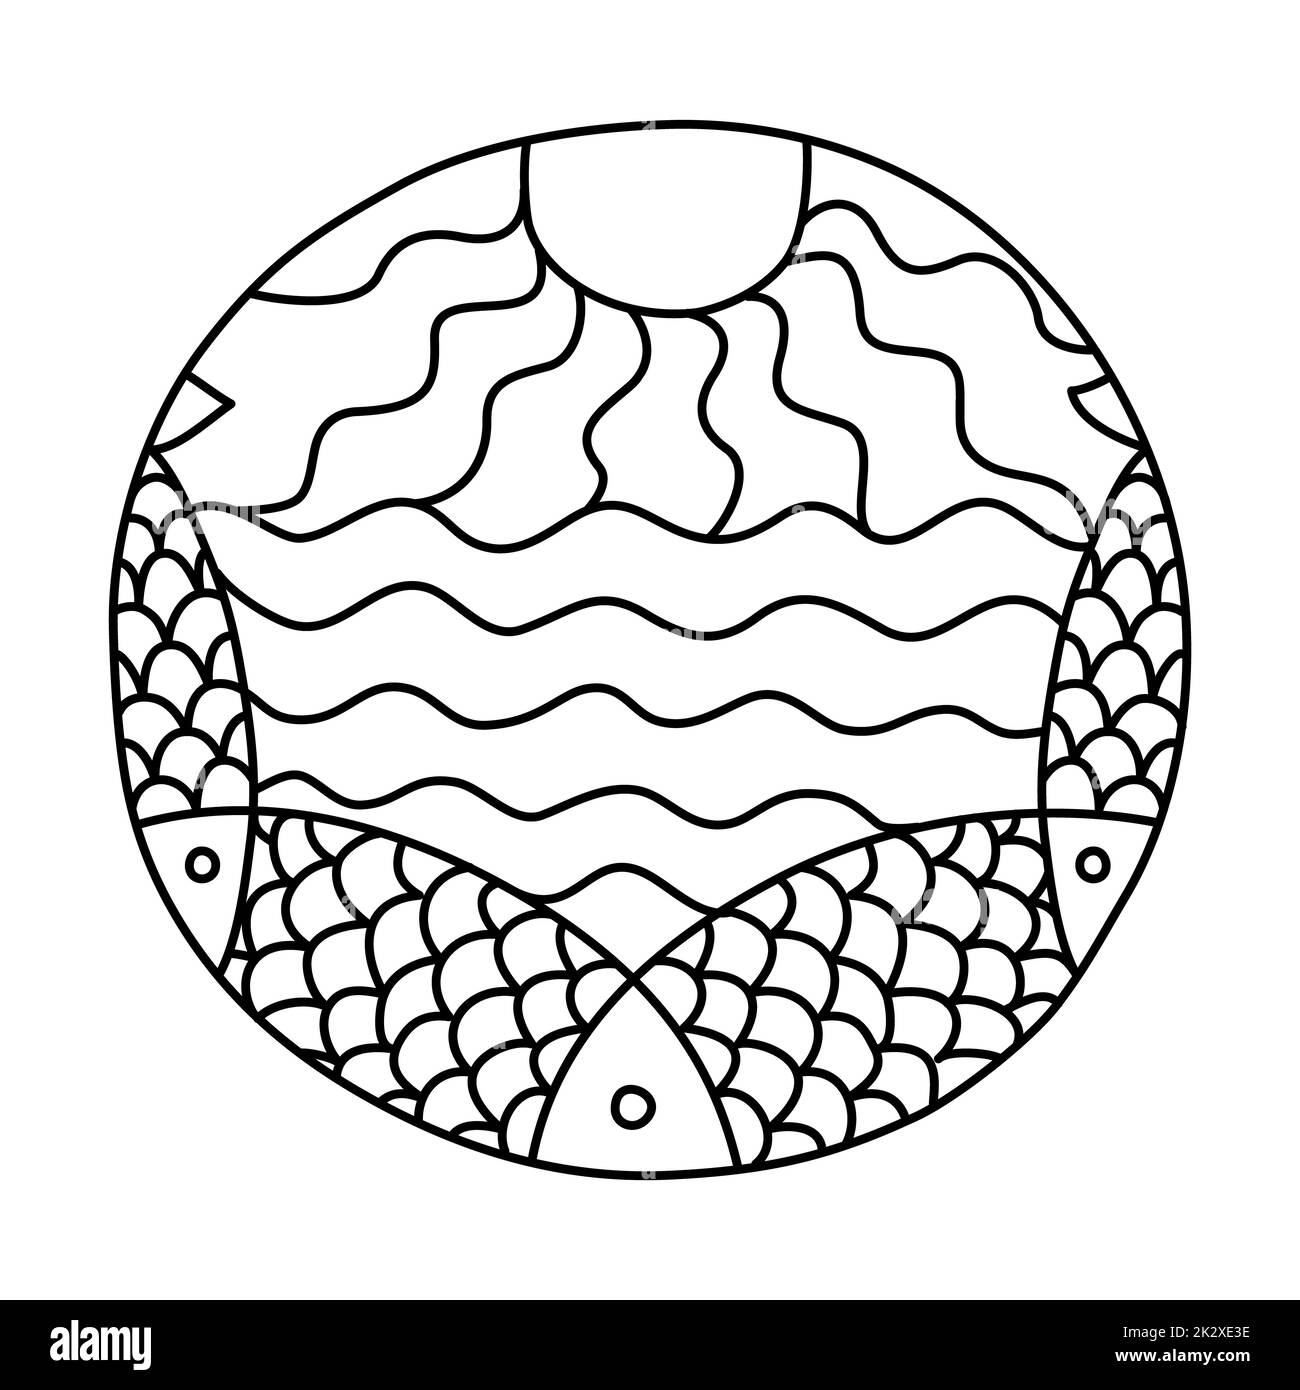 Doodles filled circle with sun sea and fish Stock Photo